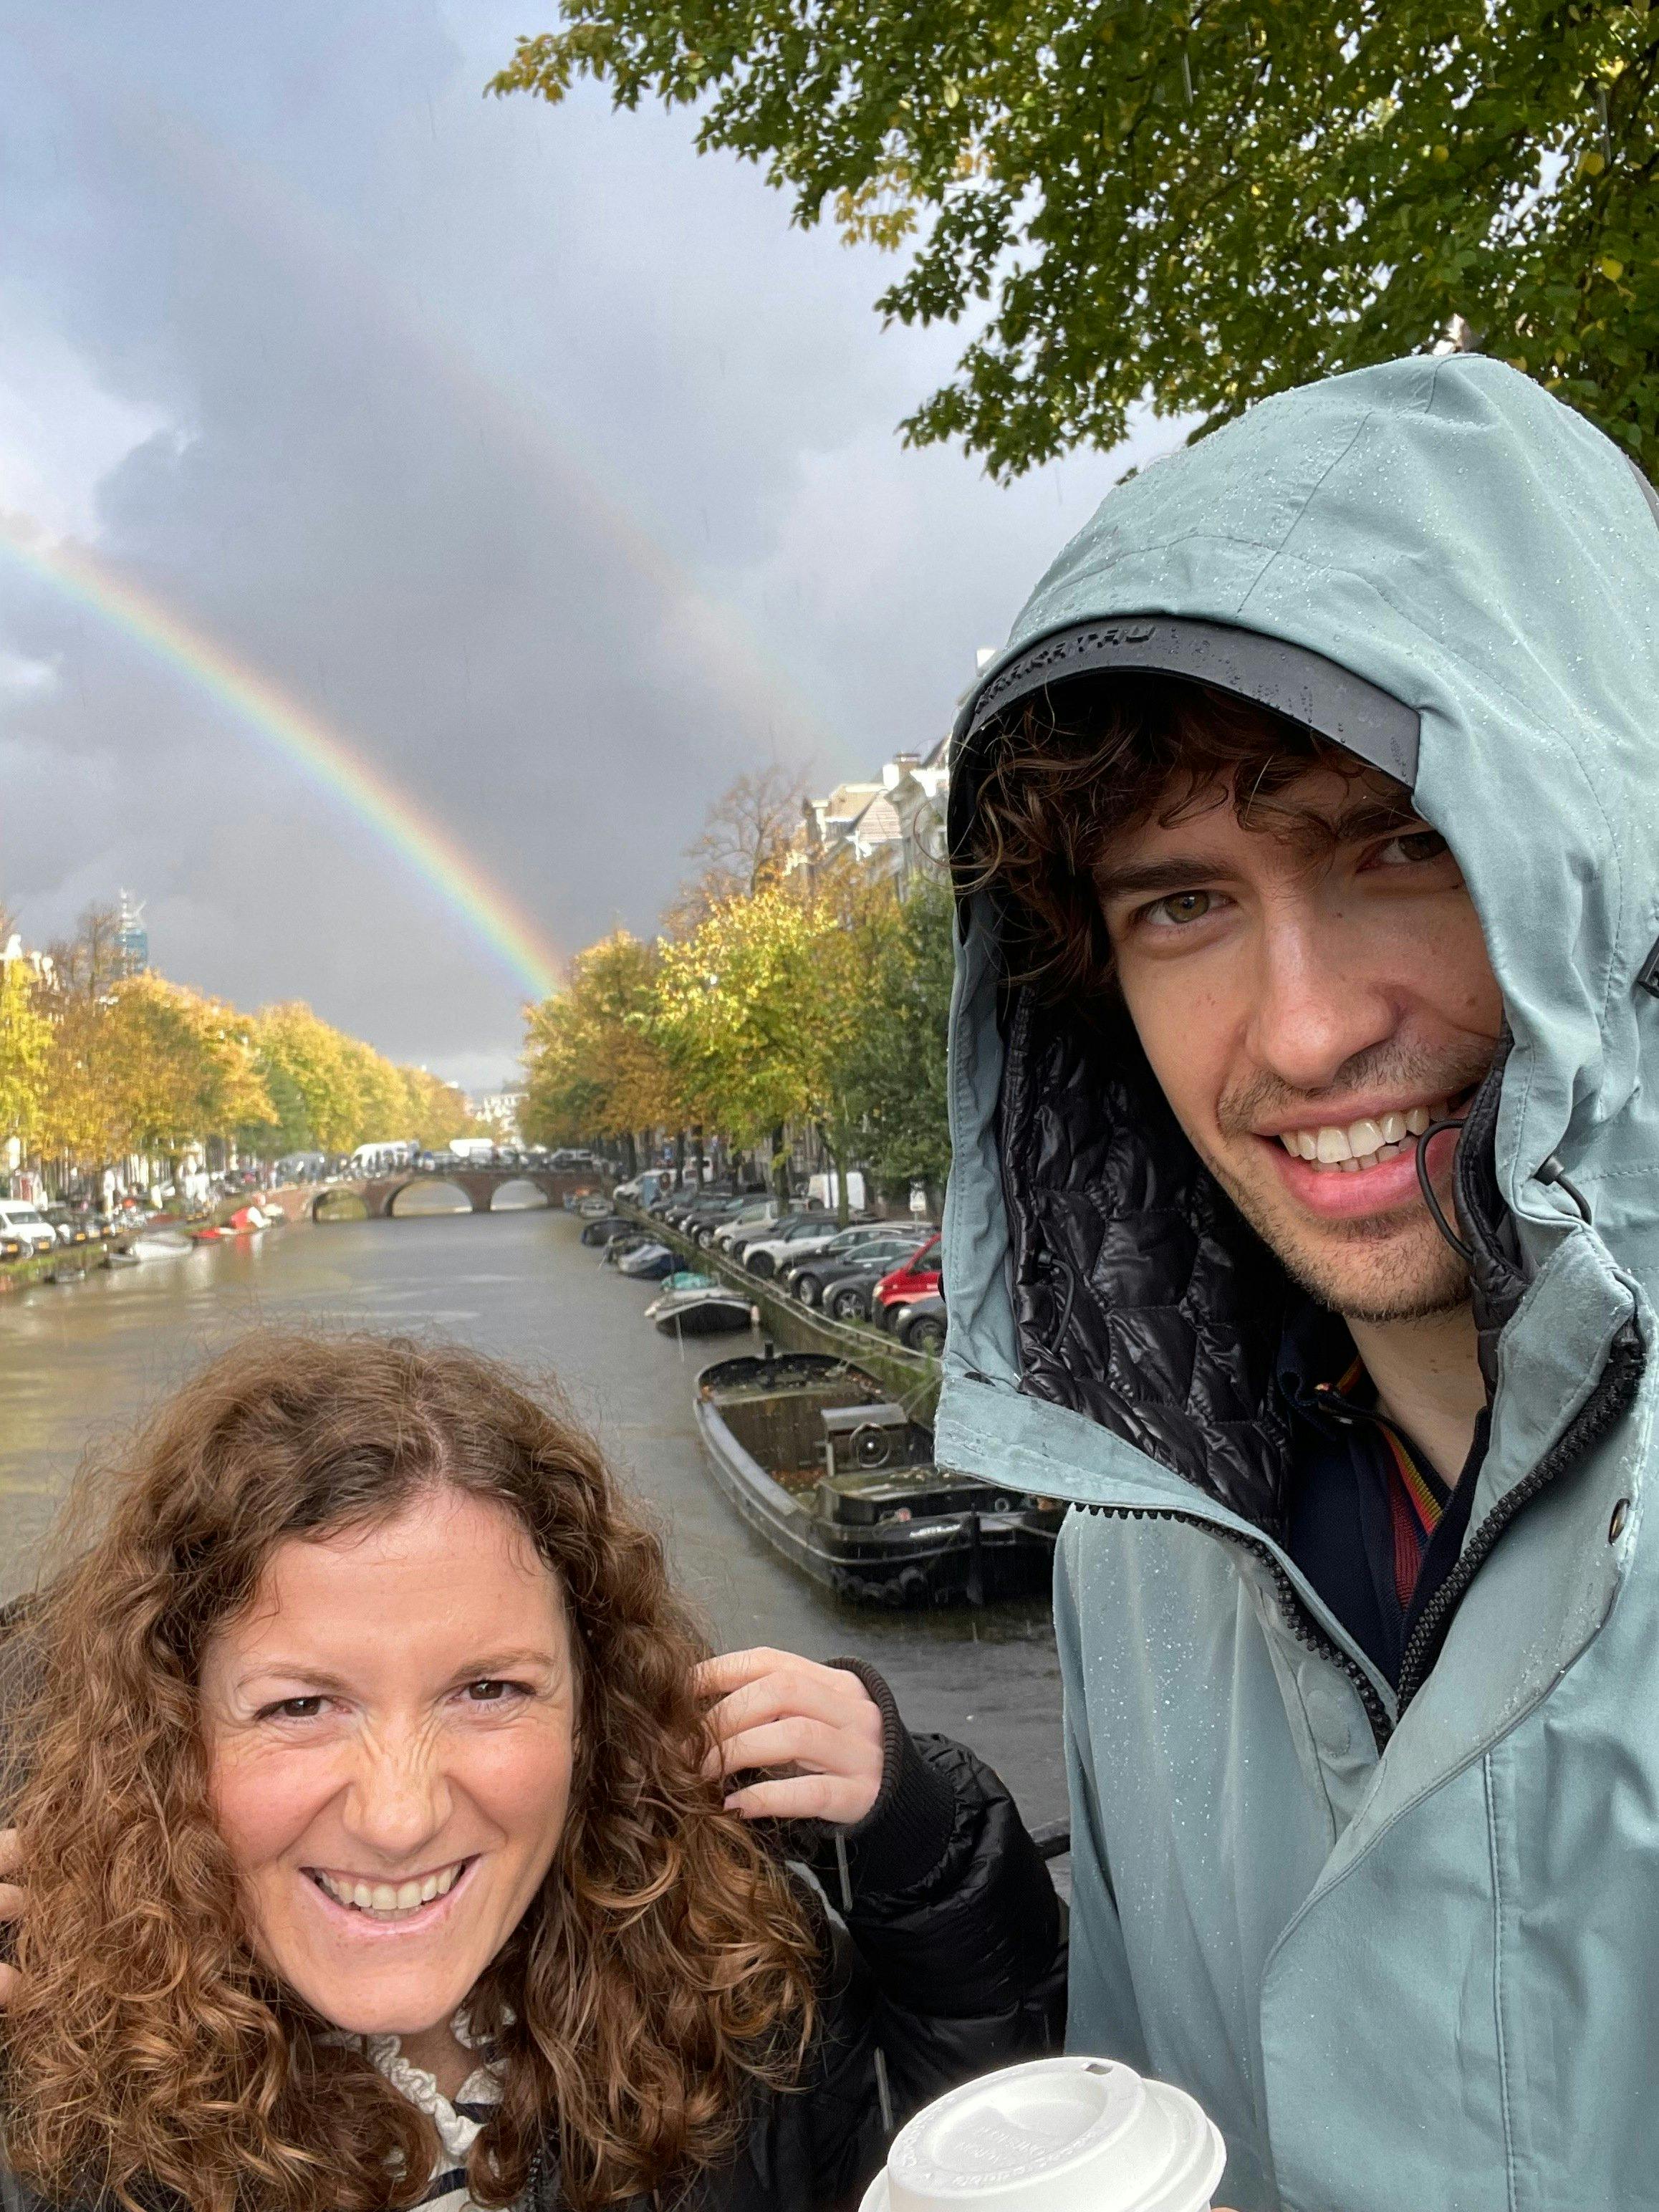 Two colleagues in front of a canal in Amsterdam. In the background is a double rainbow.